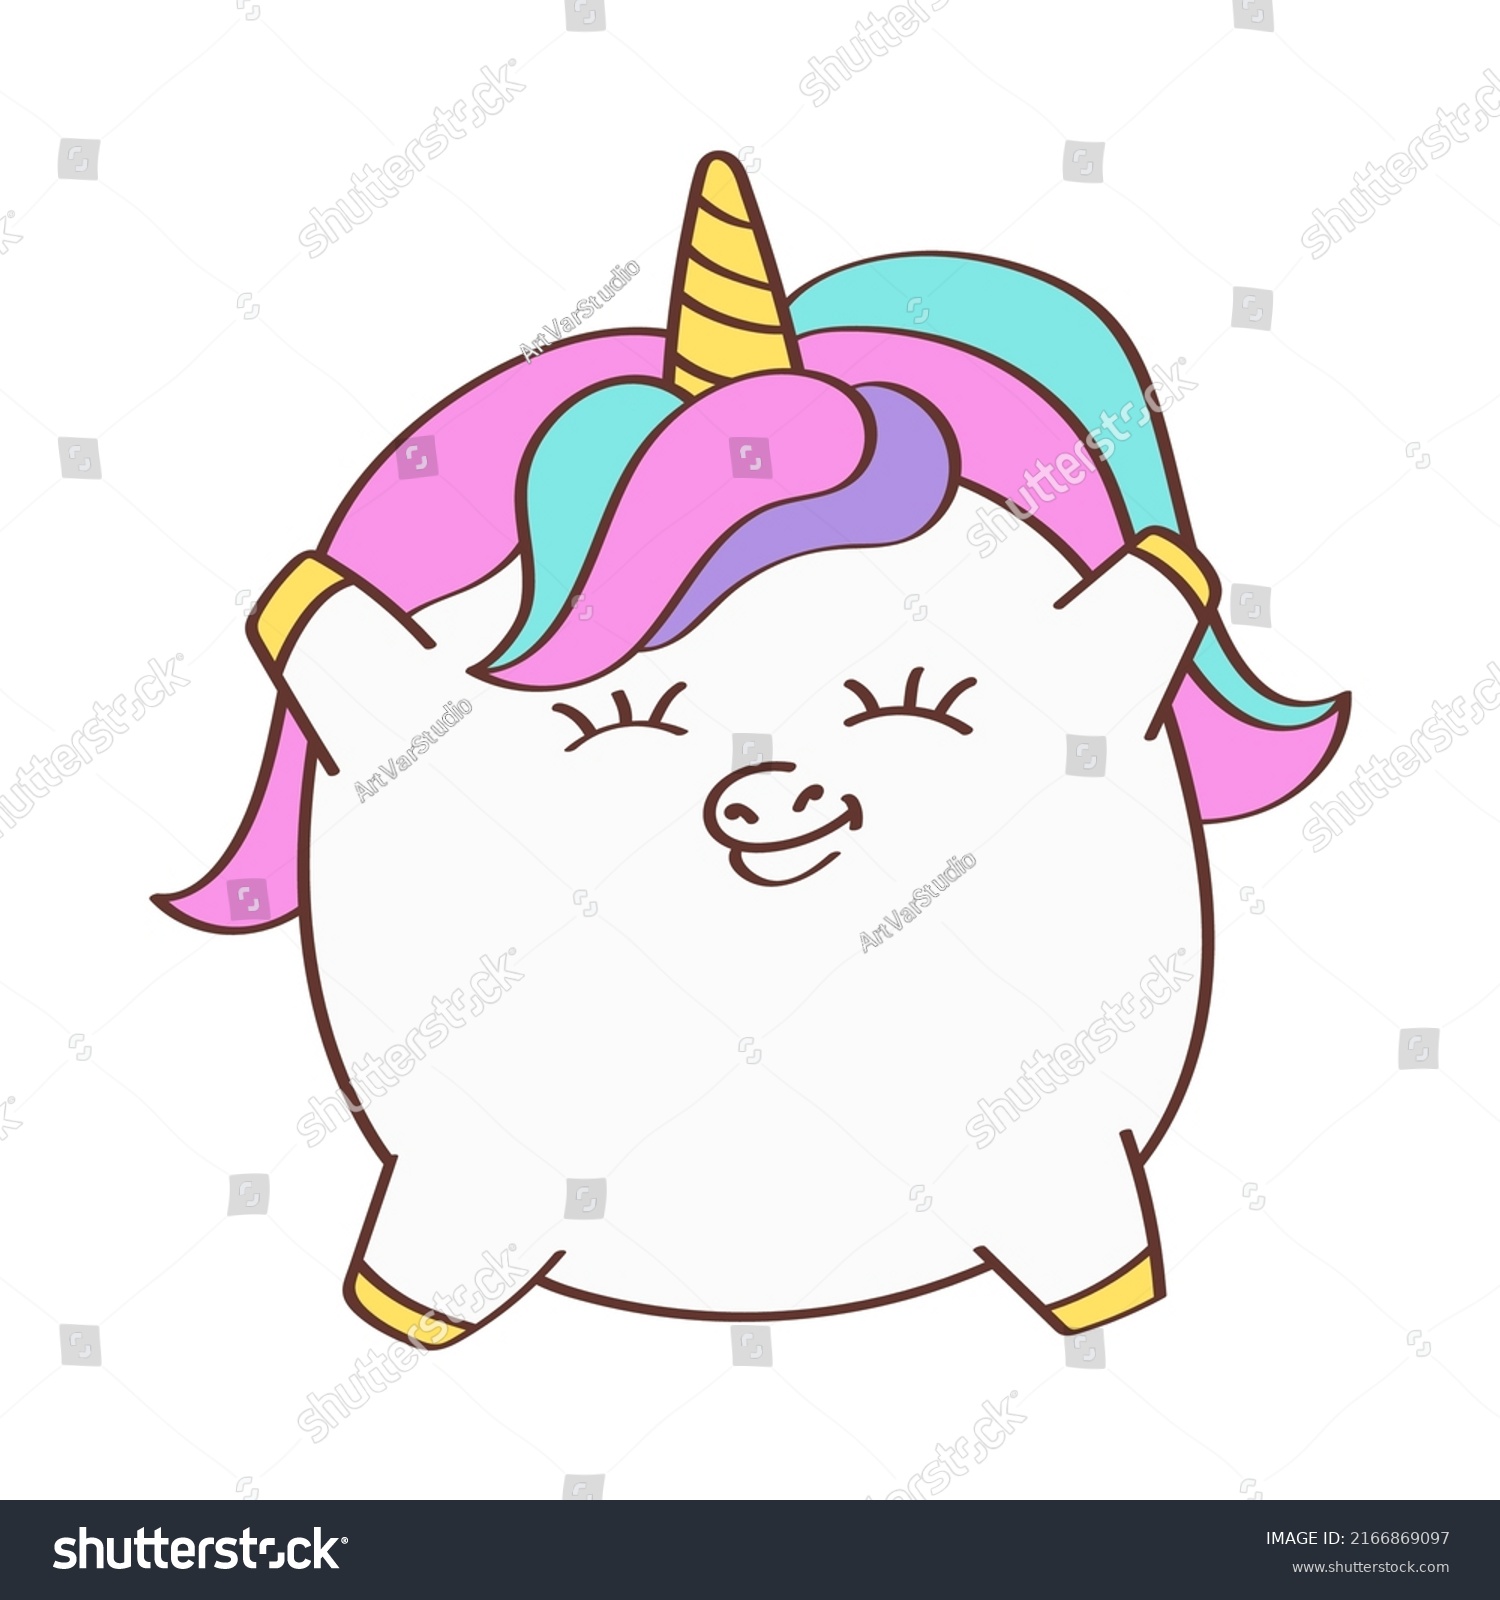 SVG of Unicorn Plump Clipart in Cute Cartoon Style Beautiful Clip Art Unicorn Fat. Vector Illustration of an Animal for Prints for Clothes, Stickers, Textile, Baby Shower Invitation.  svg